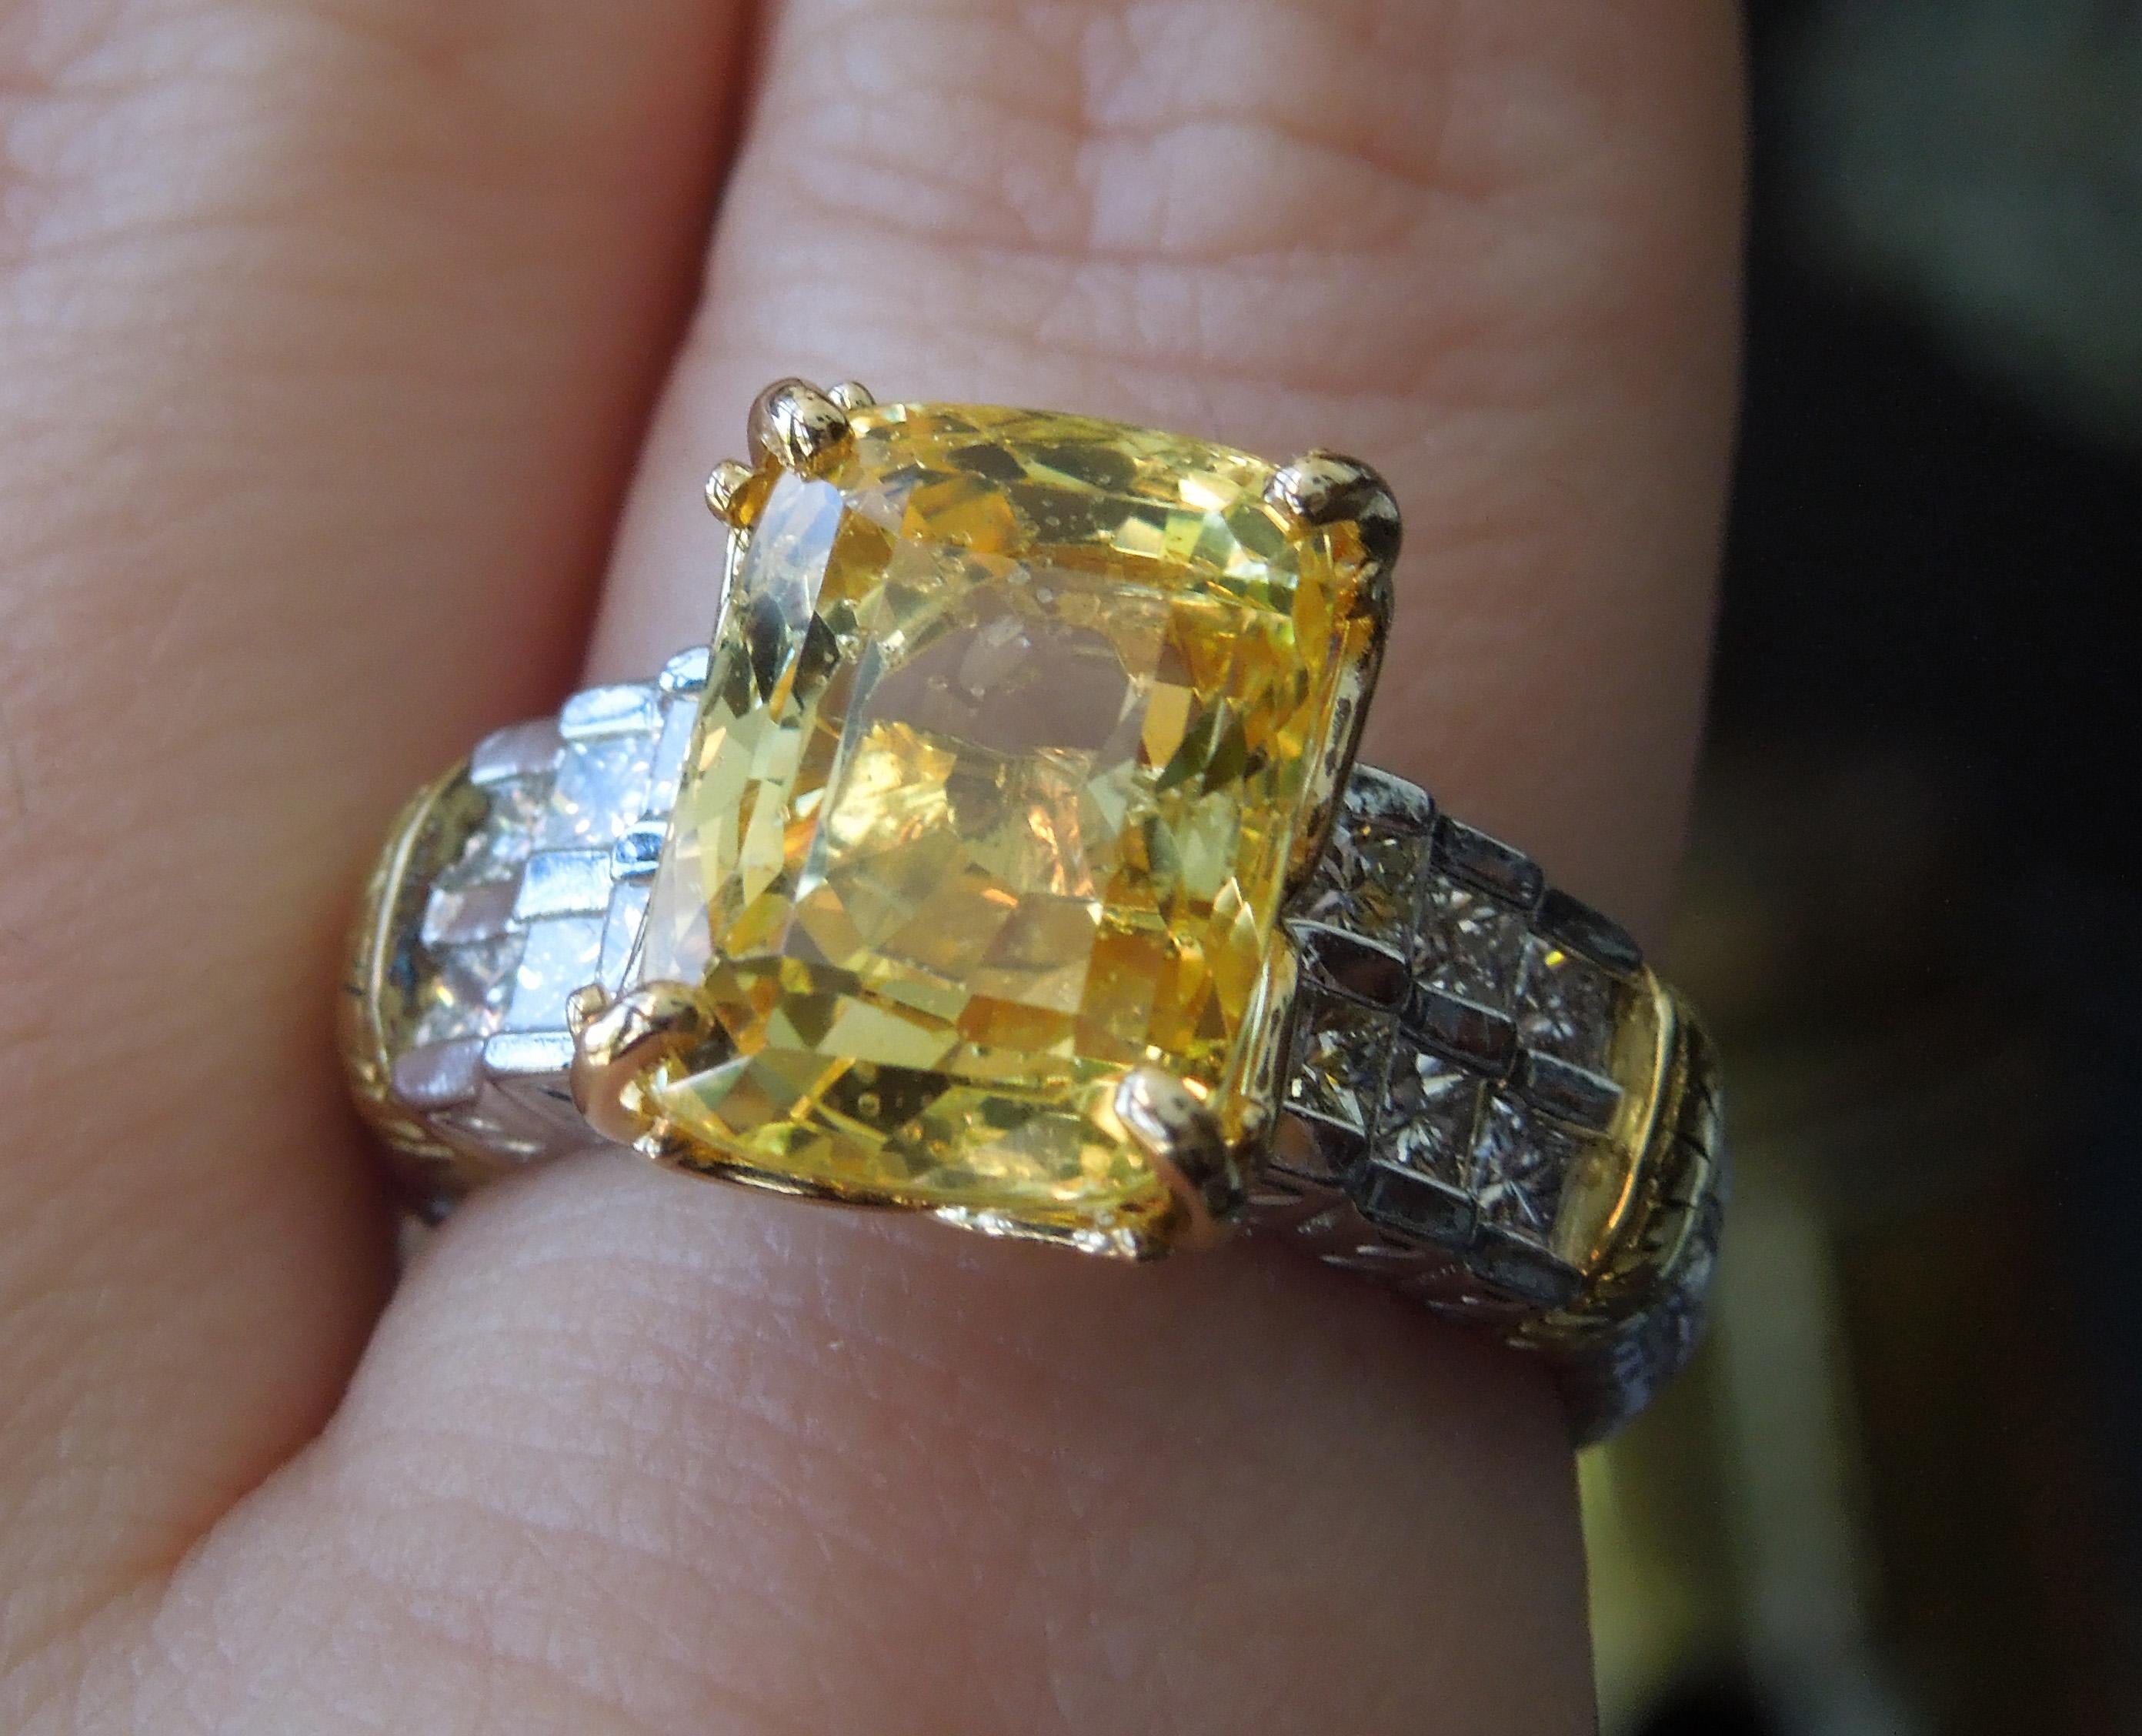 This Sapphire & Diamond Ring from our Beverly Hills Estate Collection features a central GIA Certified 10.75 carat Cushion cut Vivid Yellow Sapphire, securely set in an 18KT Yellow Gold 4-Prong Filigree head. Accented with 12 (6/ea side) Nearly